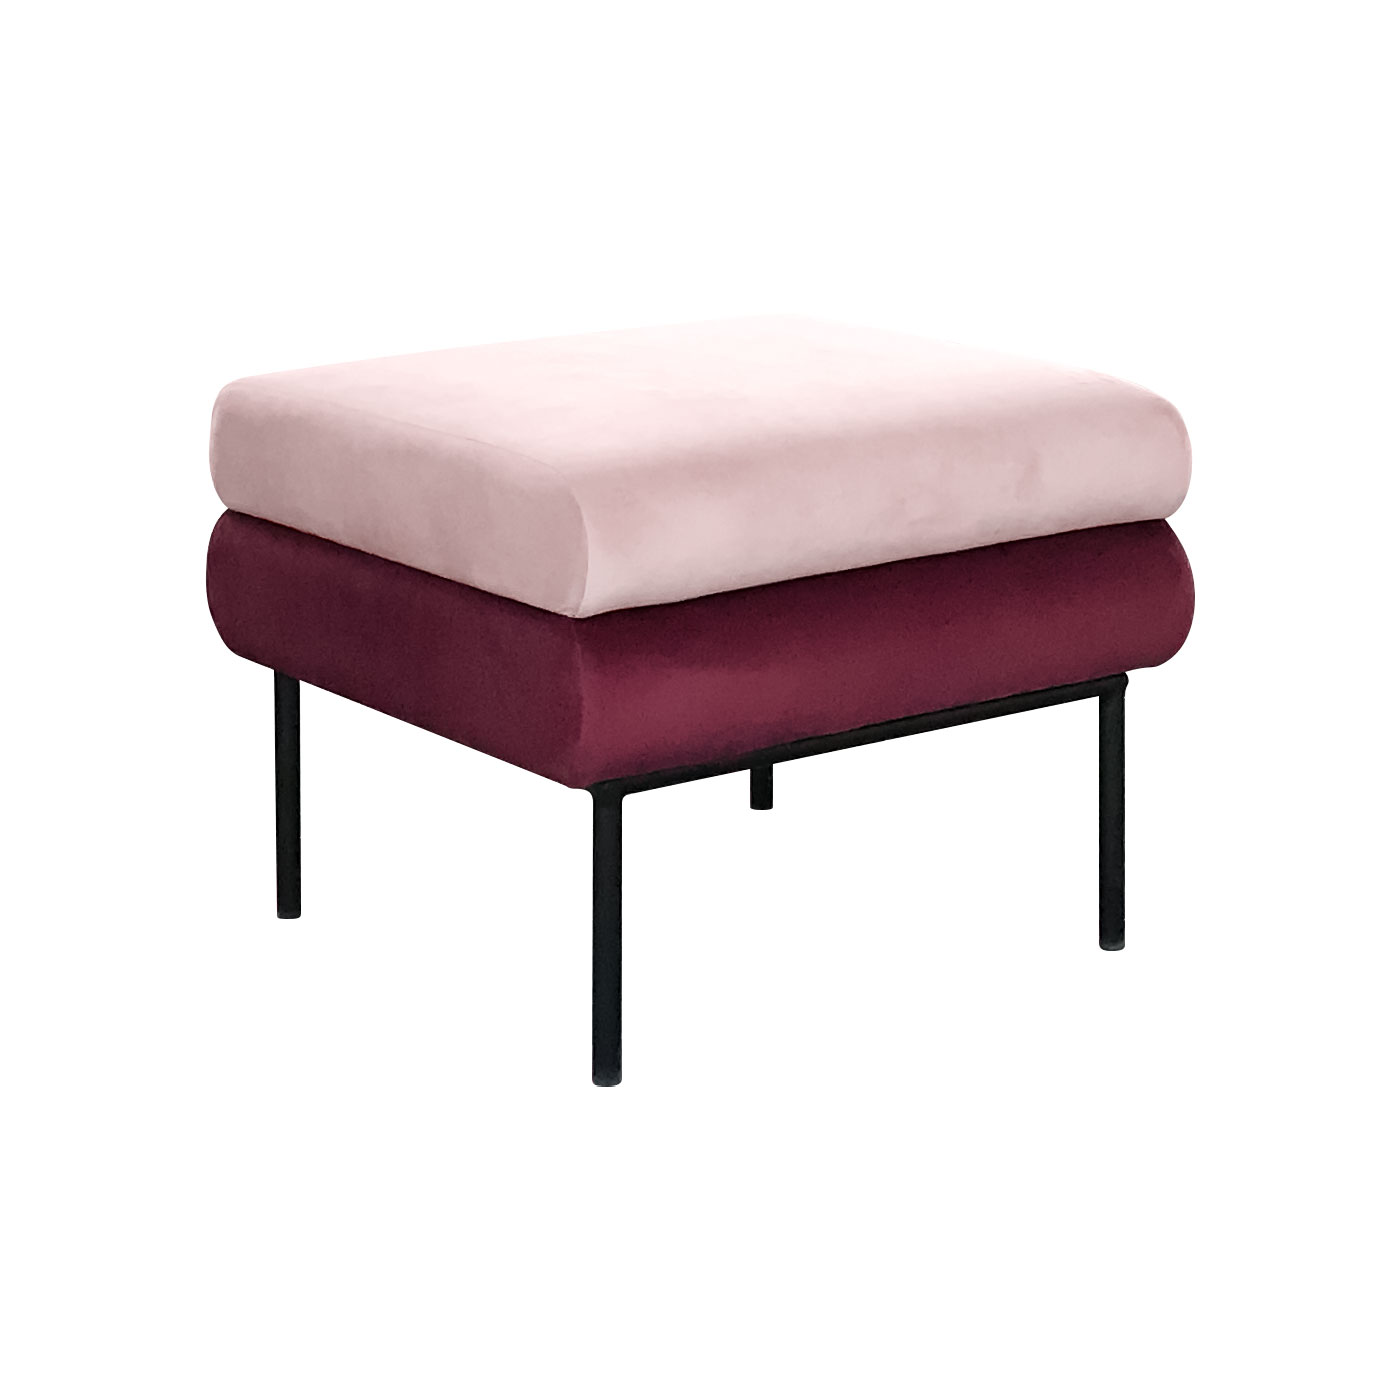 Blurred Lines Pink Ottoman